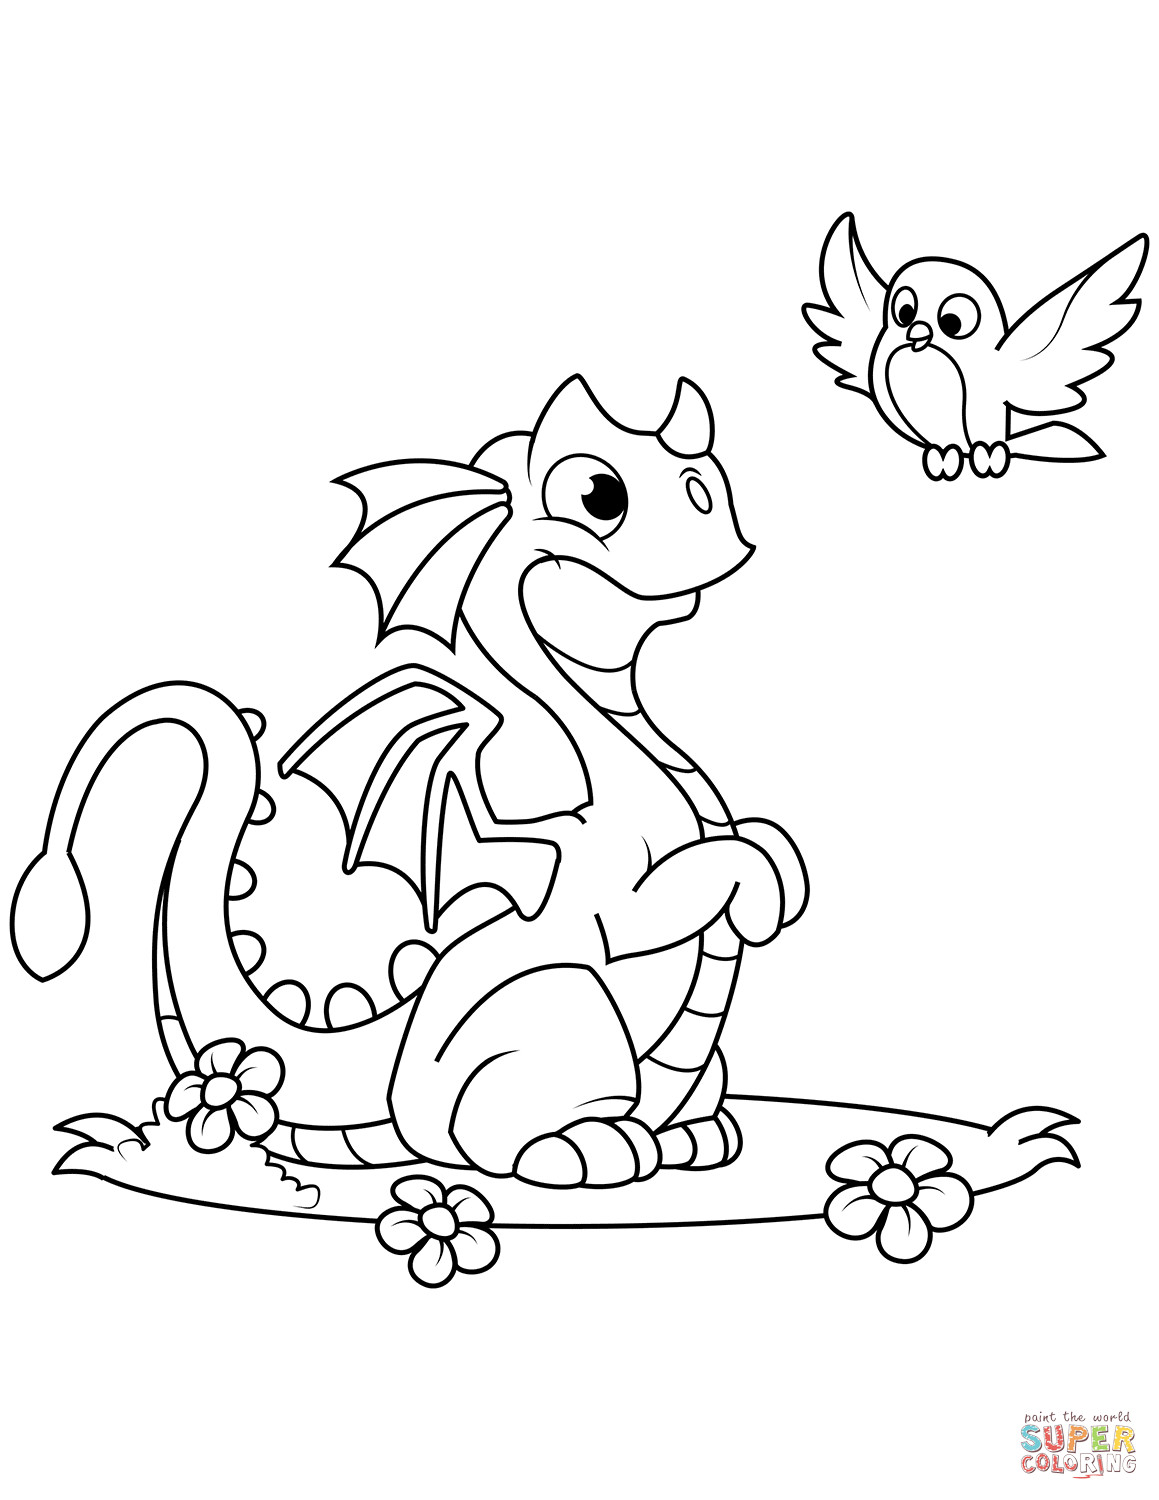 Printable Dragon Coloring Pages
 Cute Dragon and Bird coloring page